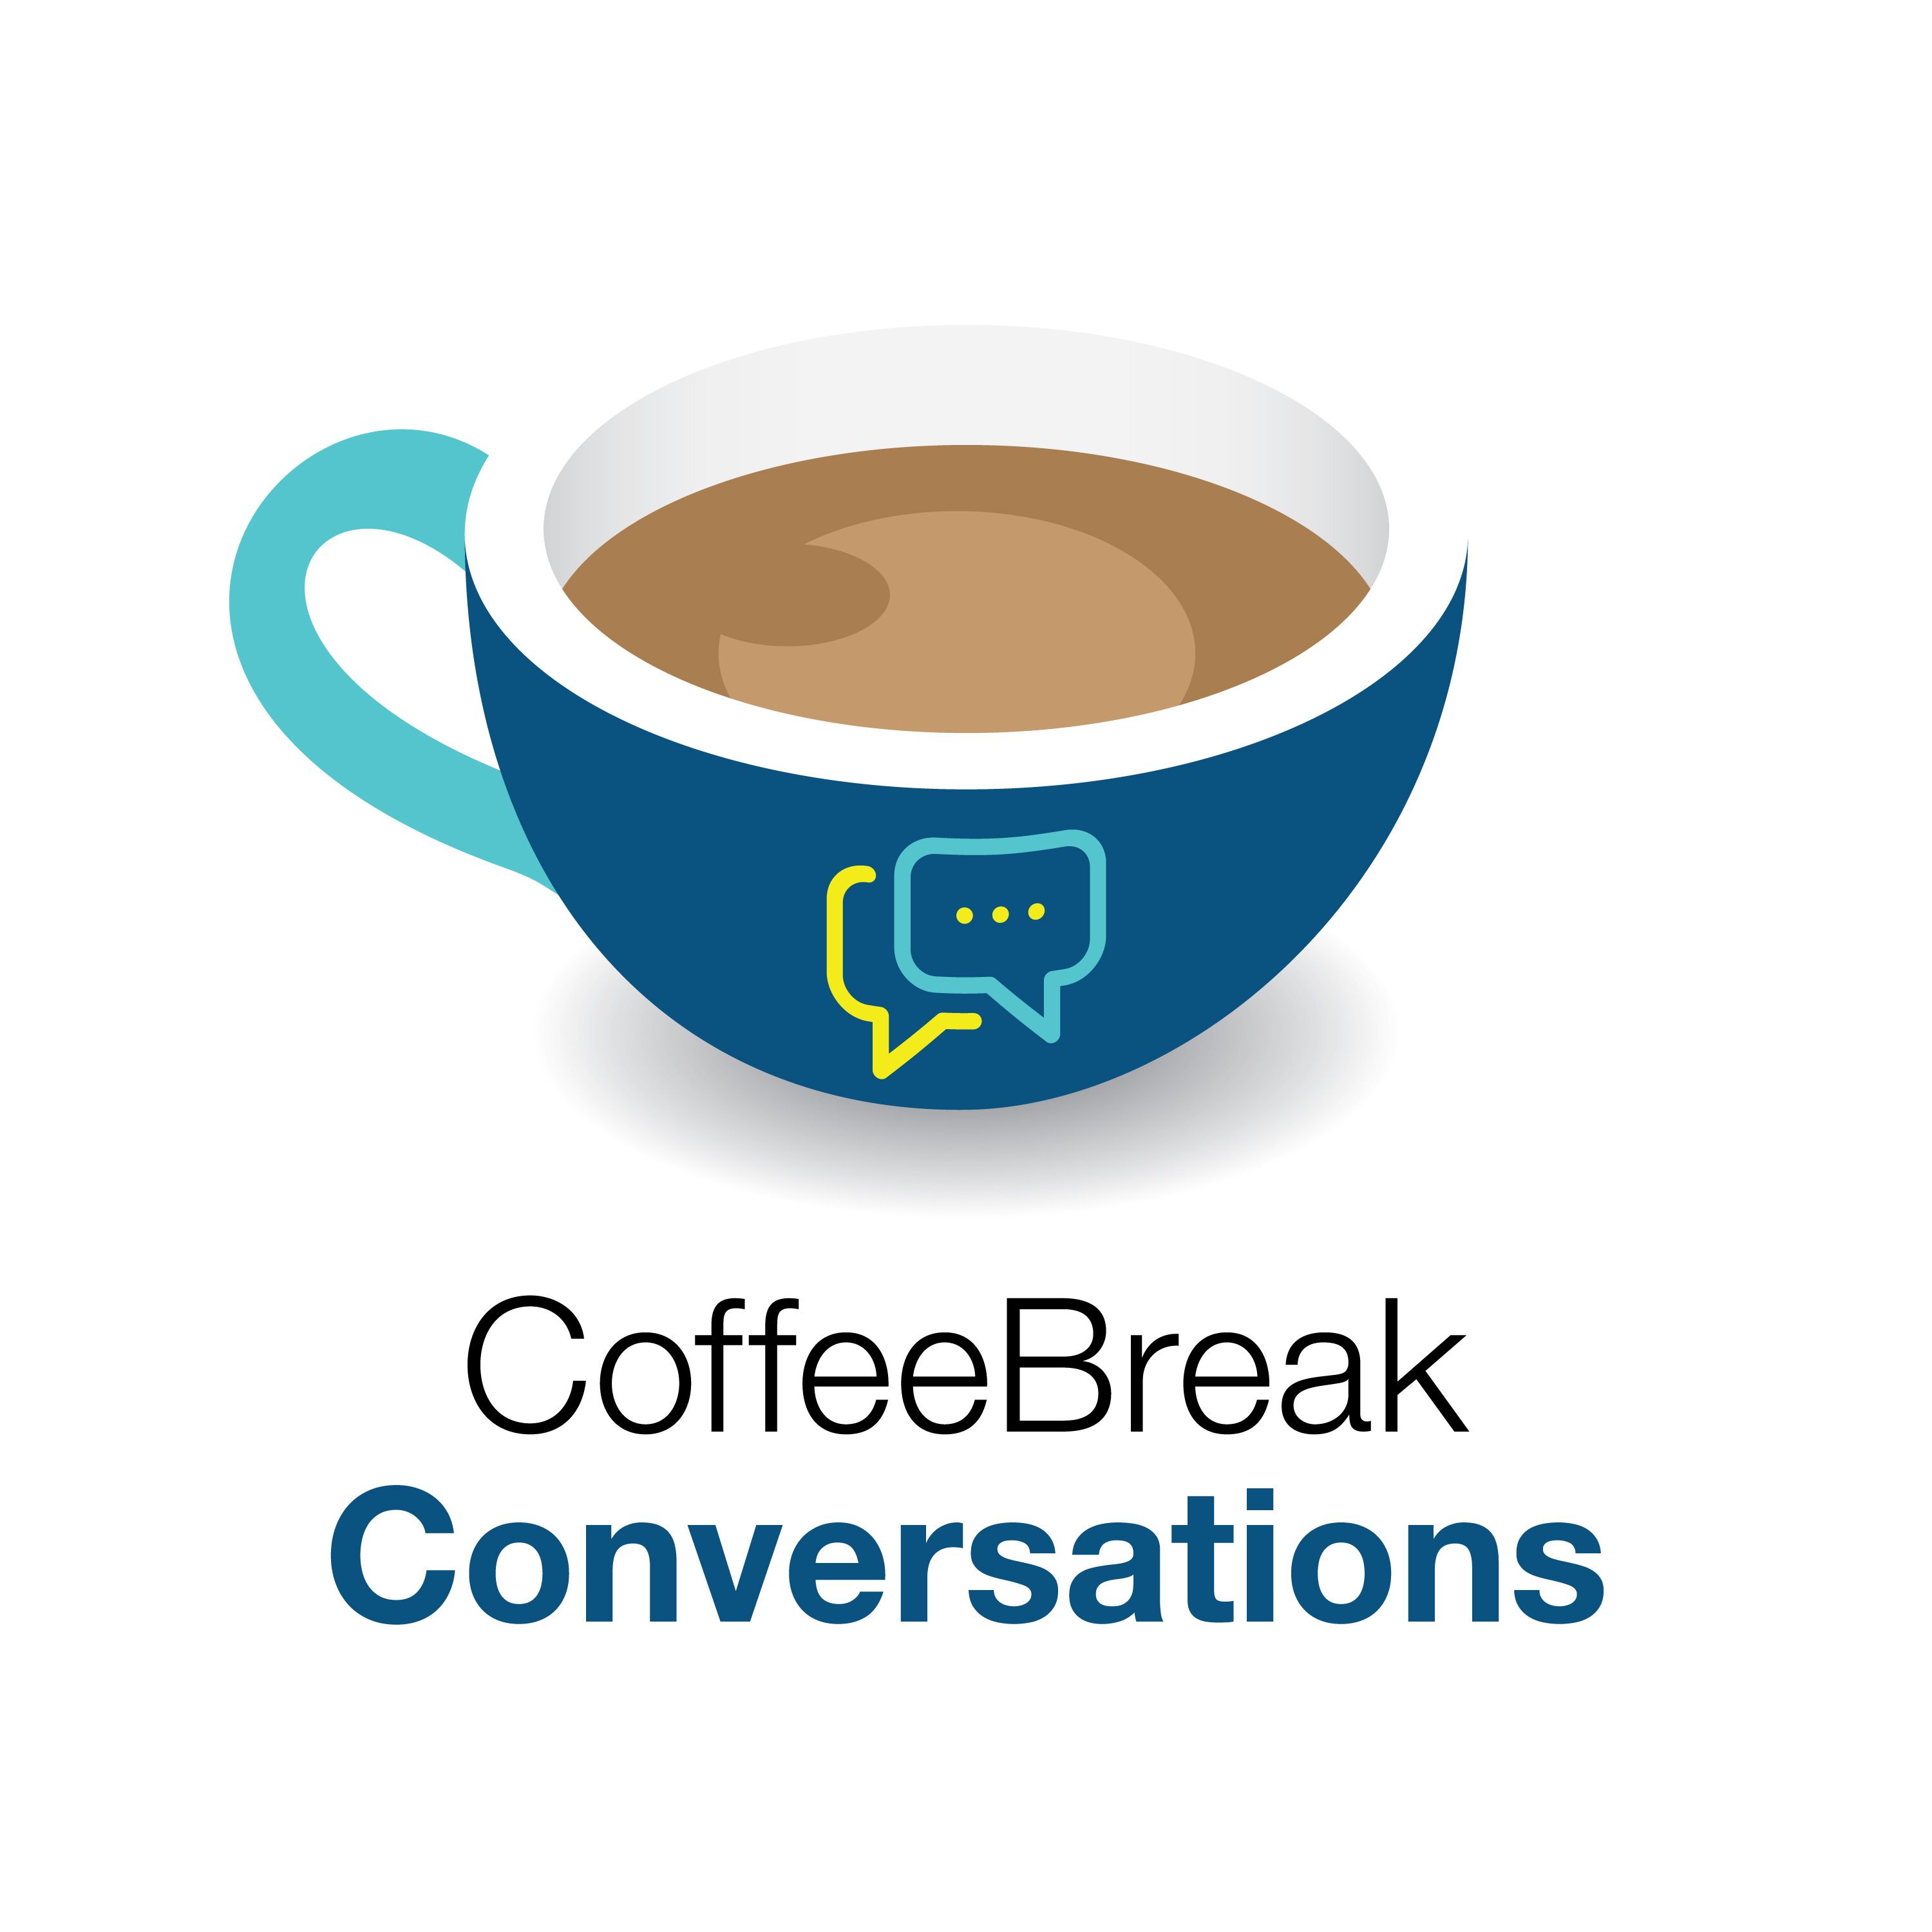 A Coffee Break Conversation with French learner Rakesh